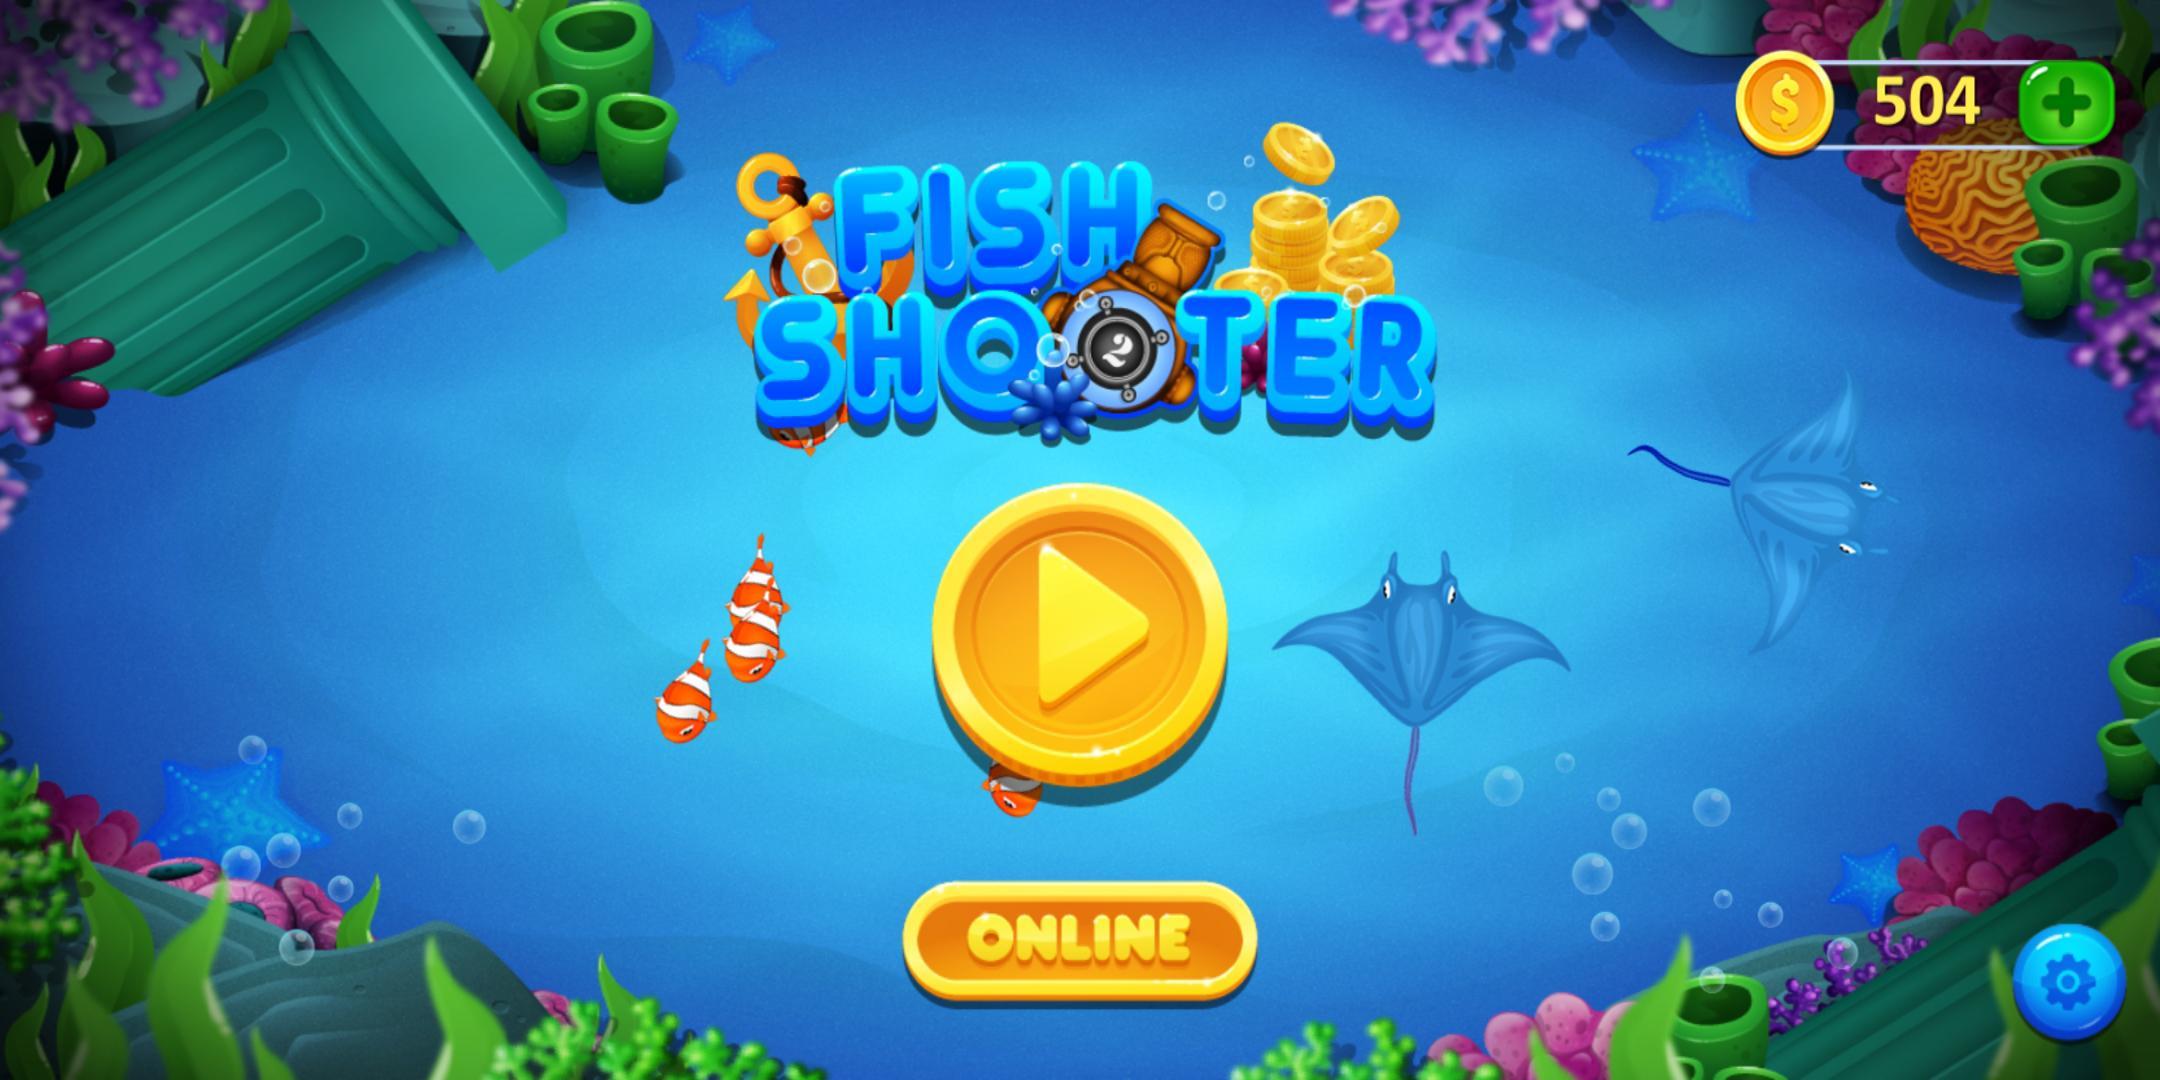 Fish shooting games – Guidance to the beginners at online websites